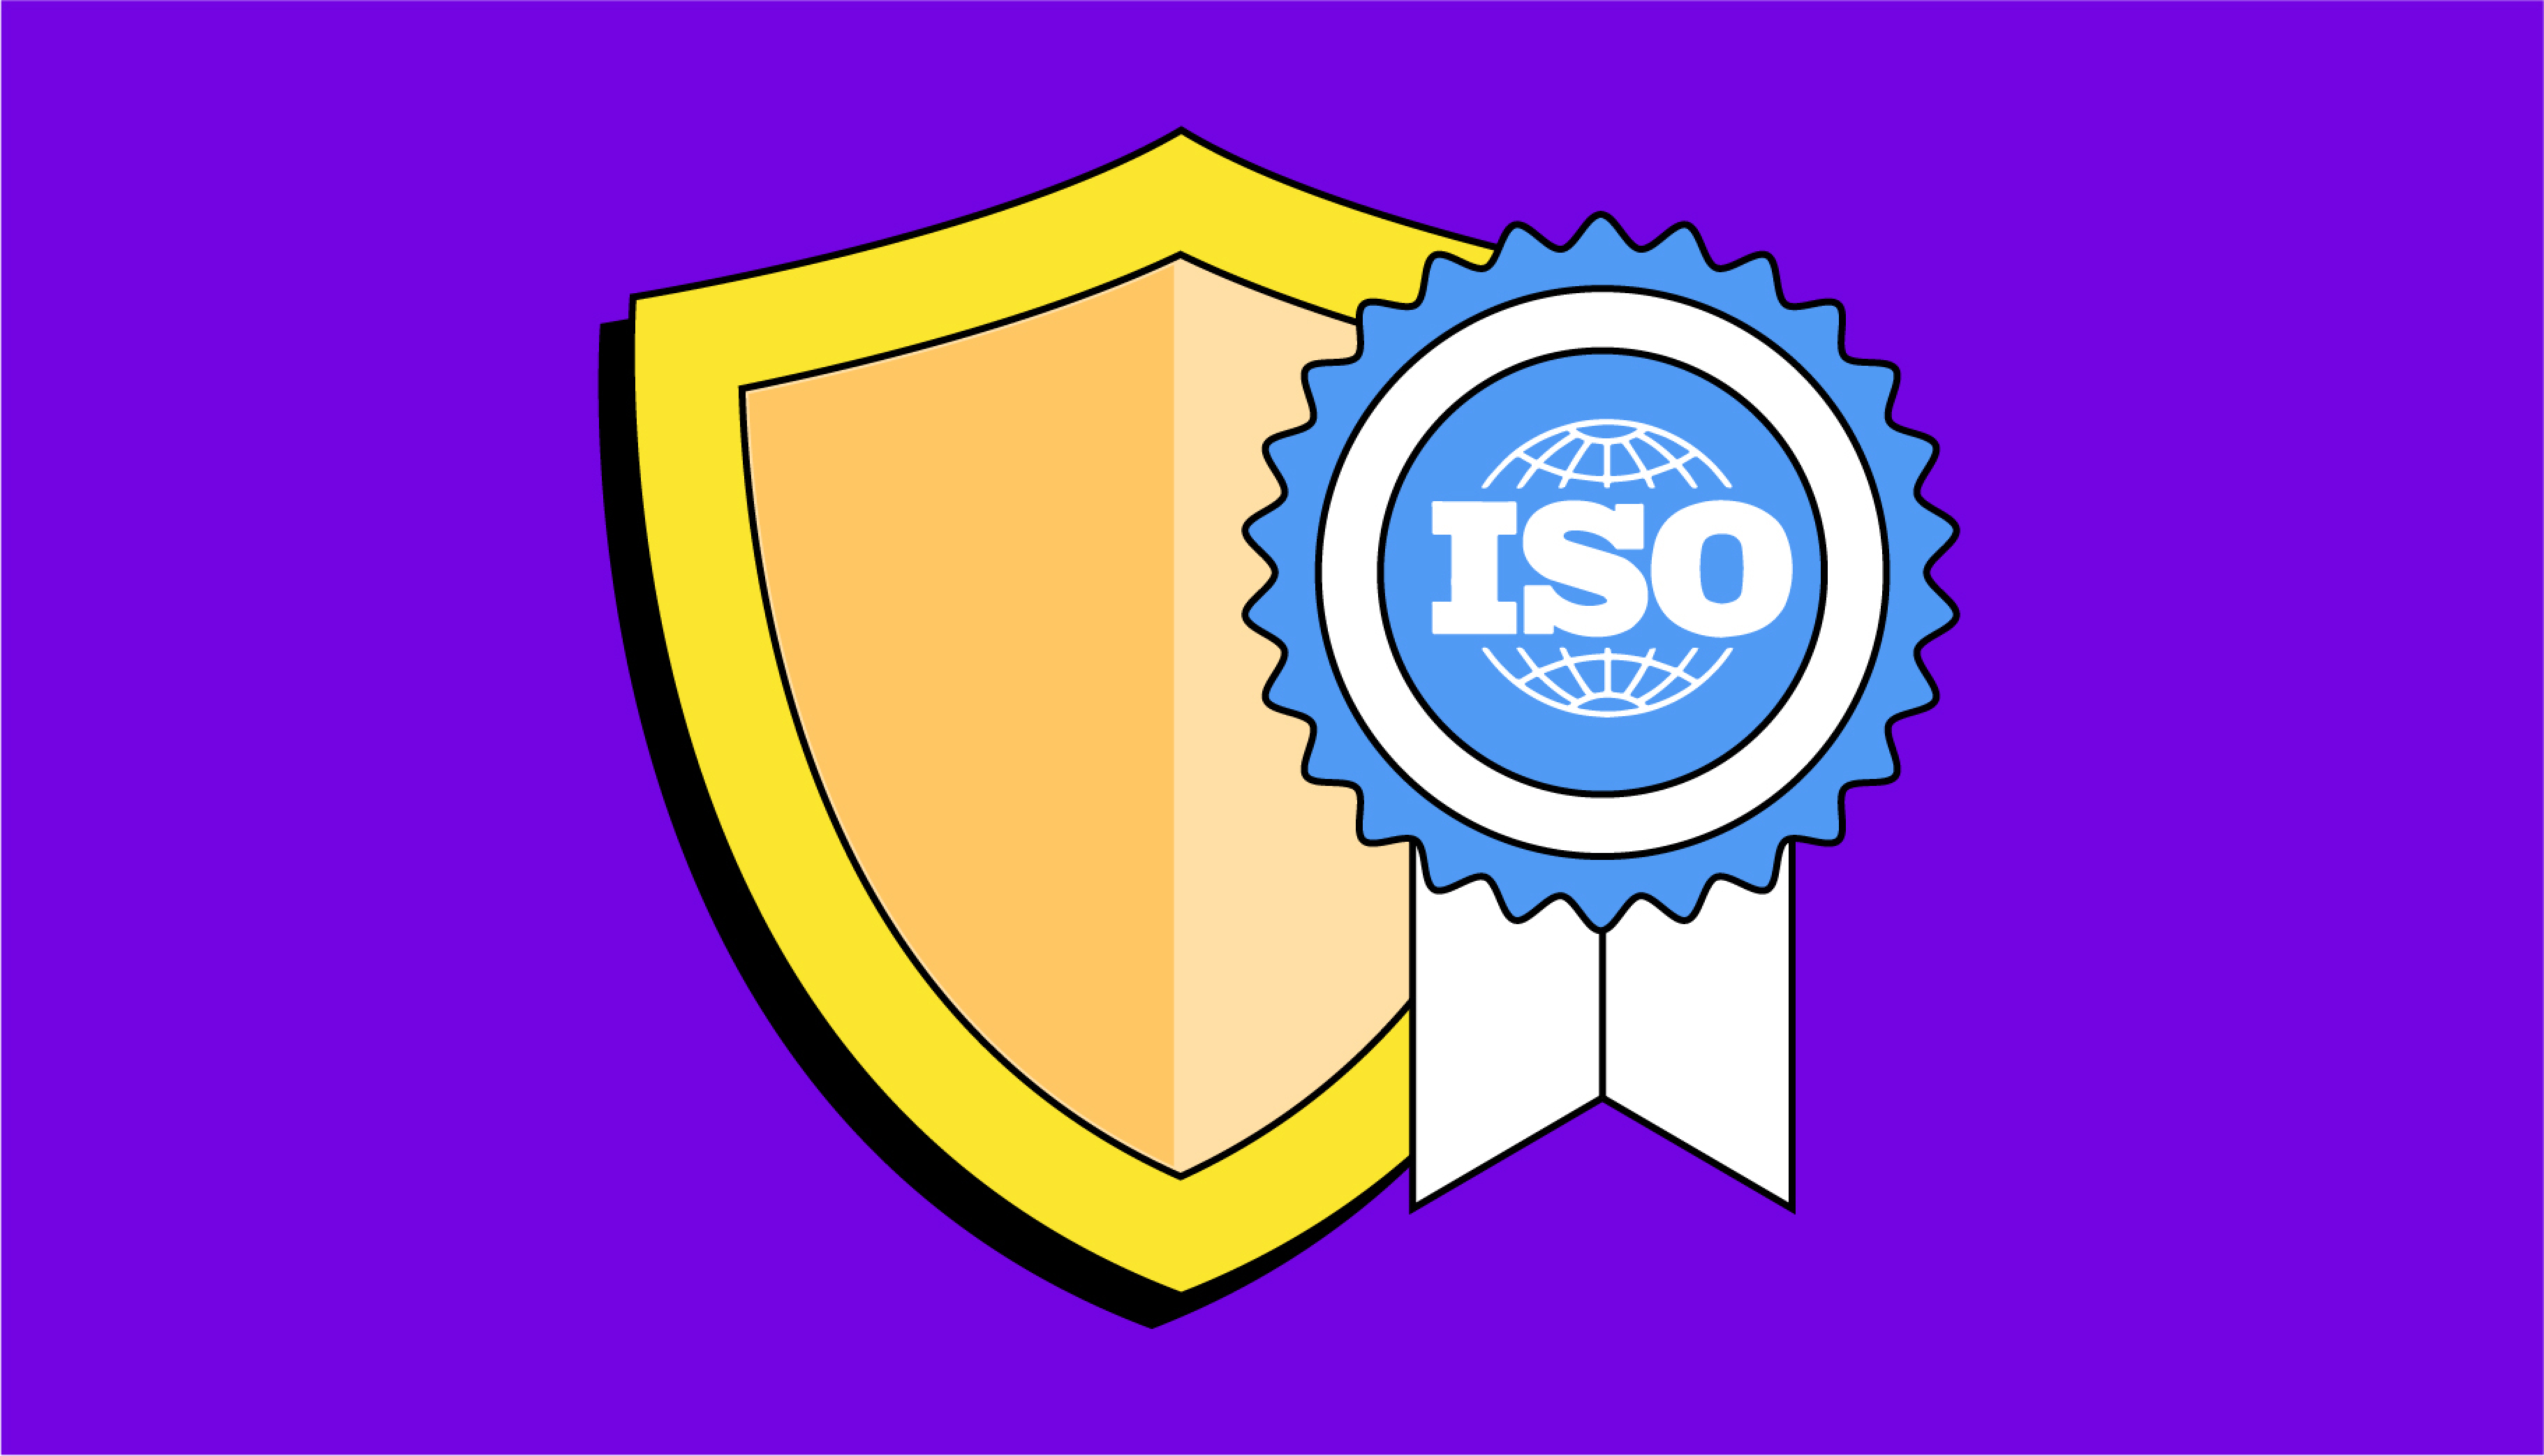 We're officially ISO/IEC 27001 compliant!